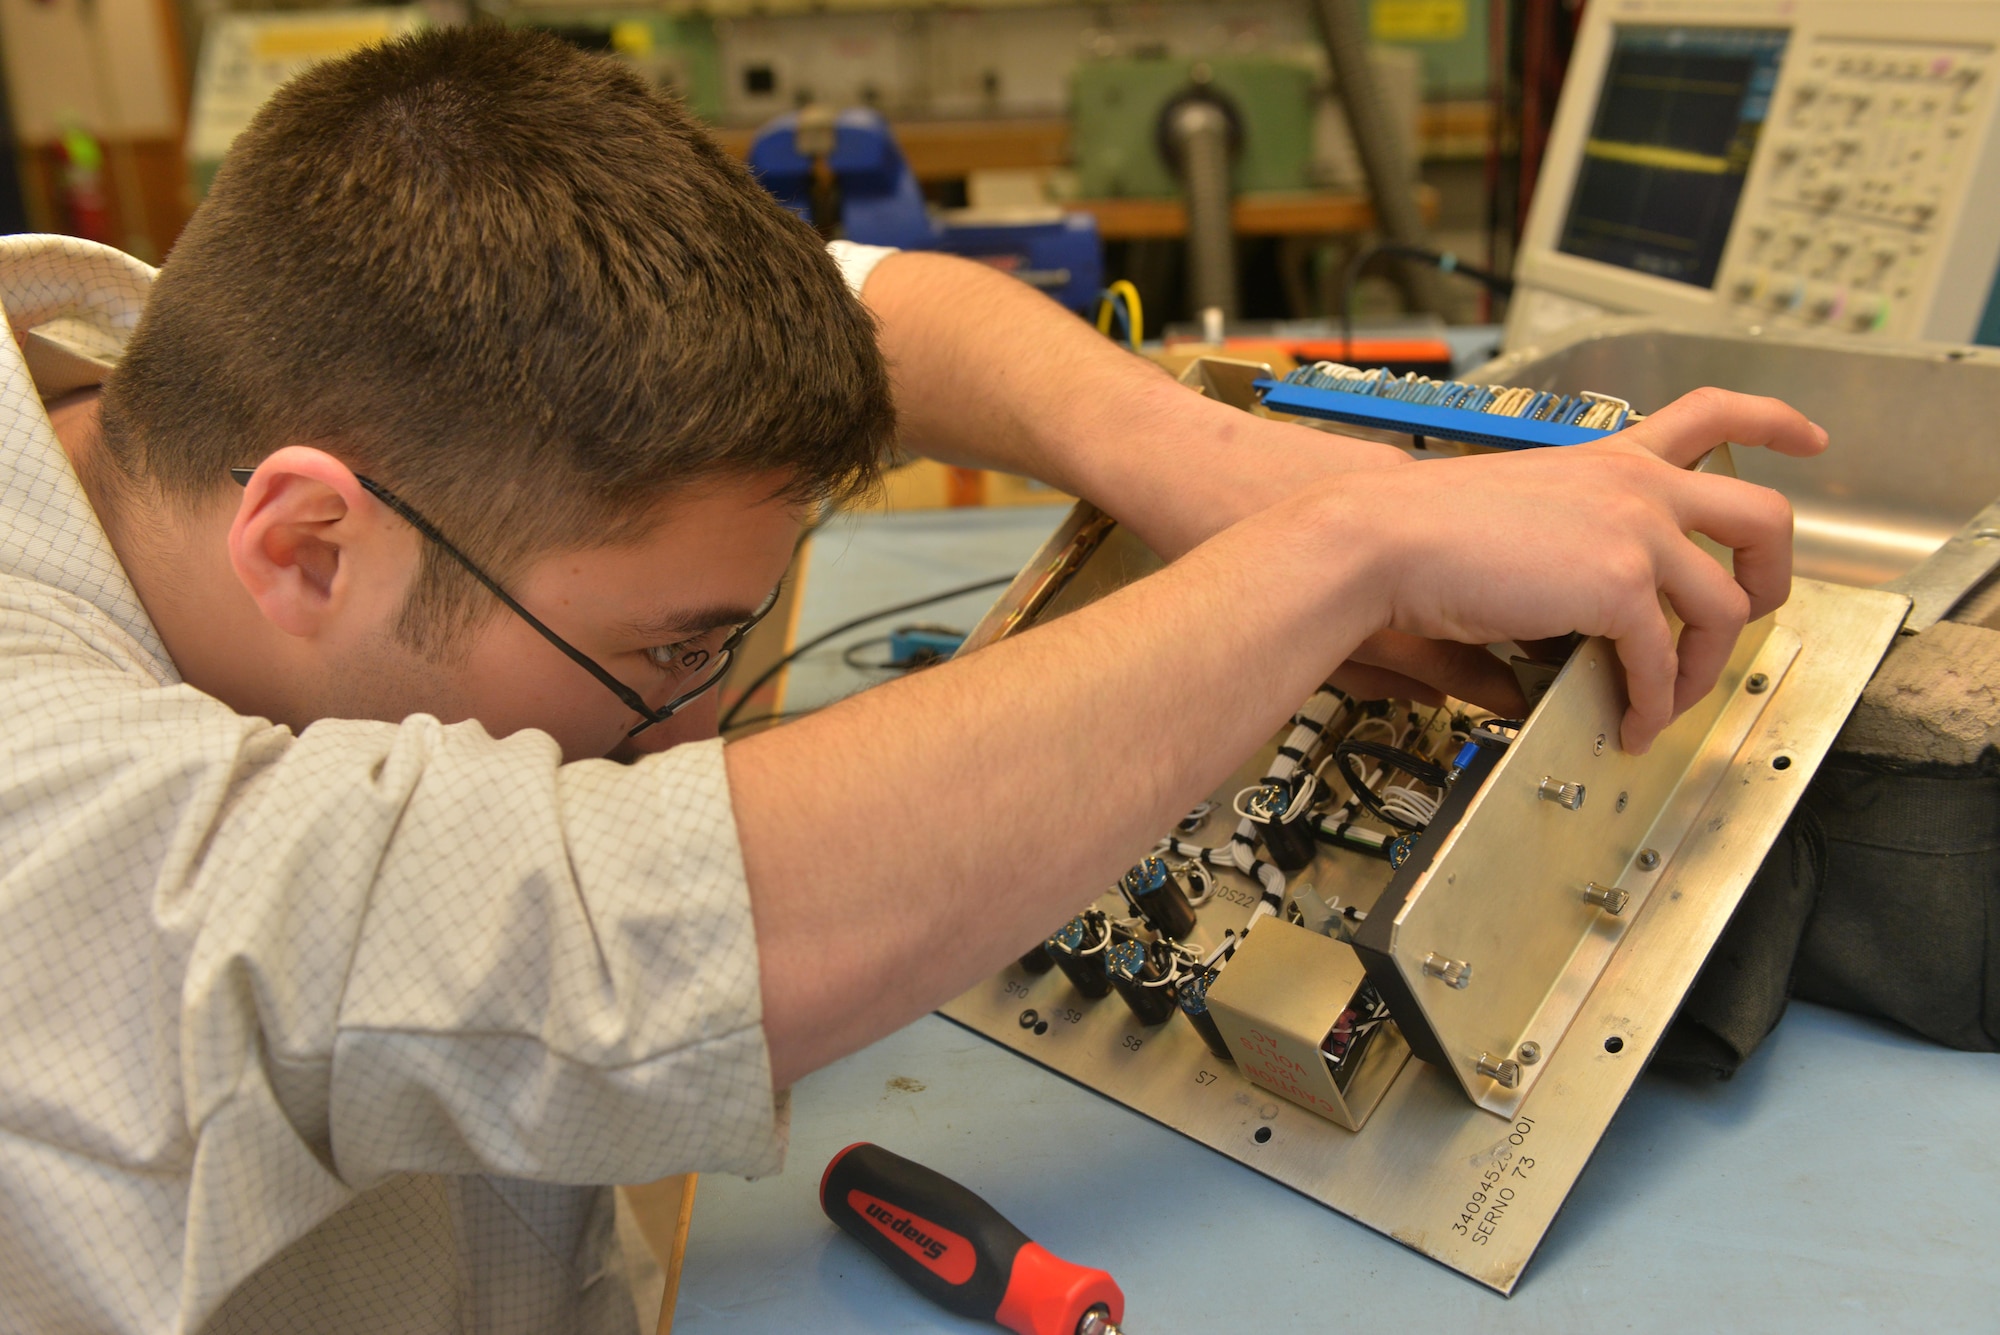 Senior Airman Maxwell Clement, 791st Maintenance Squadron electronic laboratory technician, removes a controller monitor filter at Minot Air Force Base, N.D., March 2, 2017. Electronic laboratory technicians inspect, troubleshoot, and repair electronic components and test equipment for launch facilities and launch control centers. (U.S. Air Force photo/Airman 1st Class Jessica Weissman)